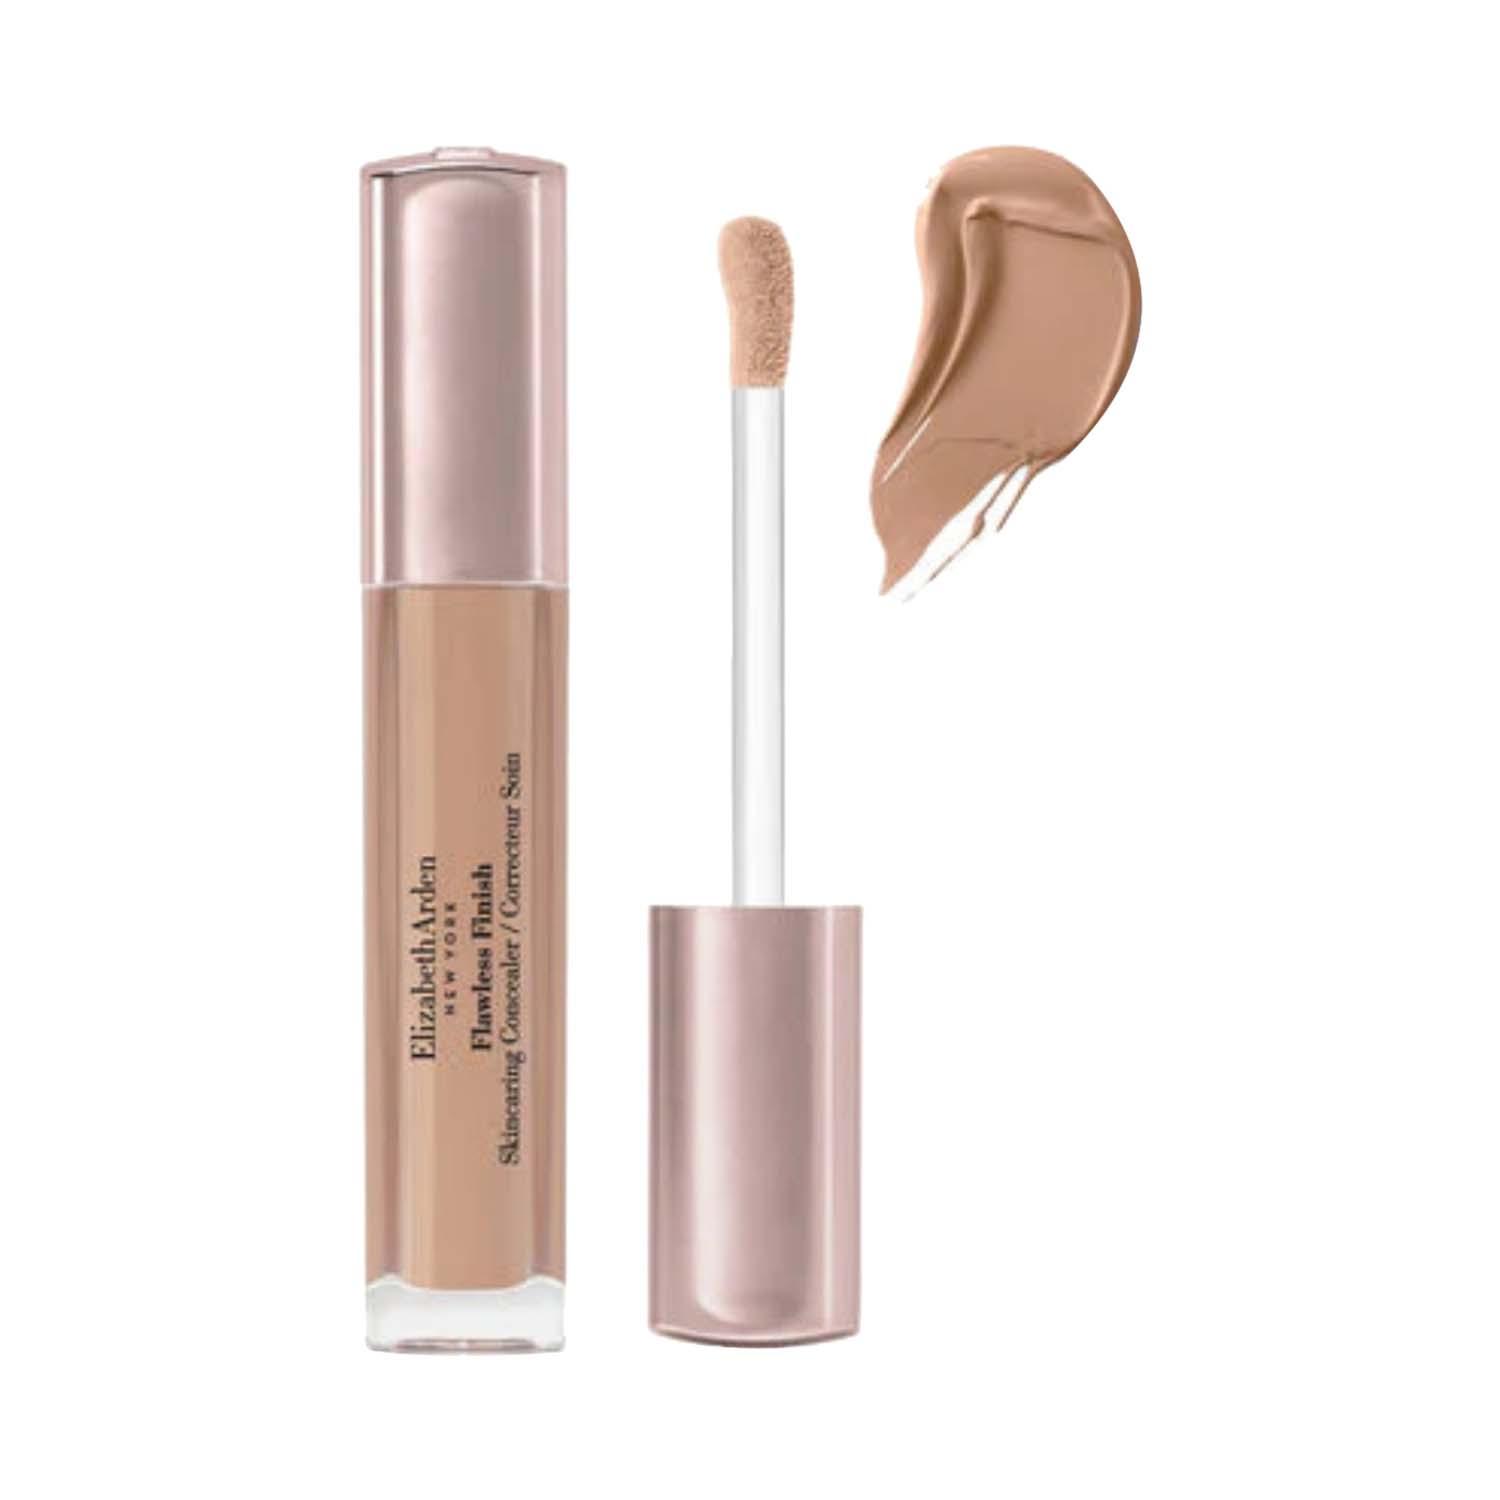 Elizabeth Arden | Flawless Finish Skincaring Concealer - Shade 6 - Tan With Neutral Tones (7 ml)